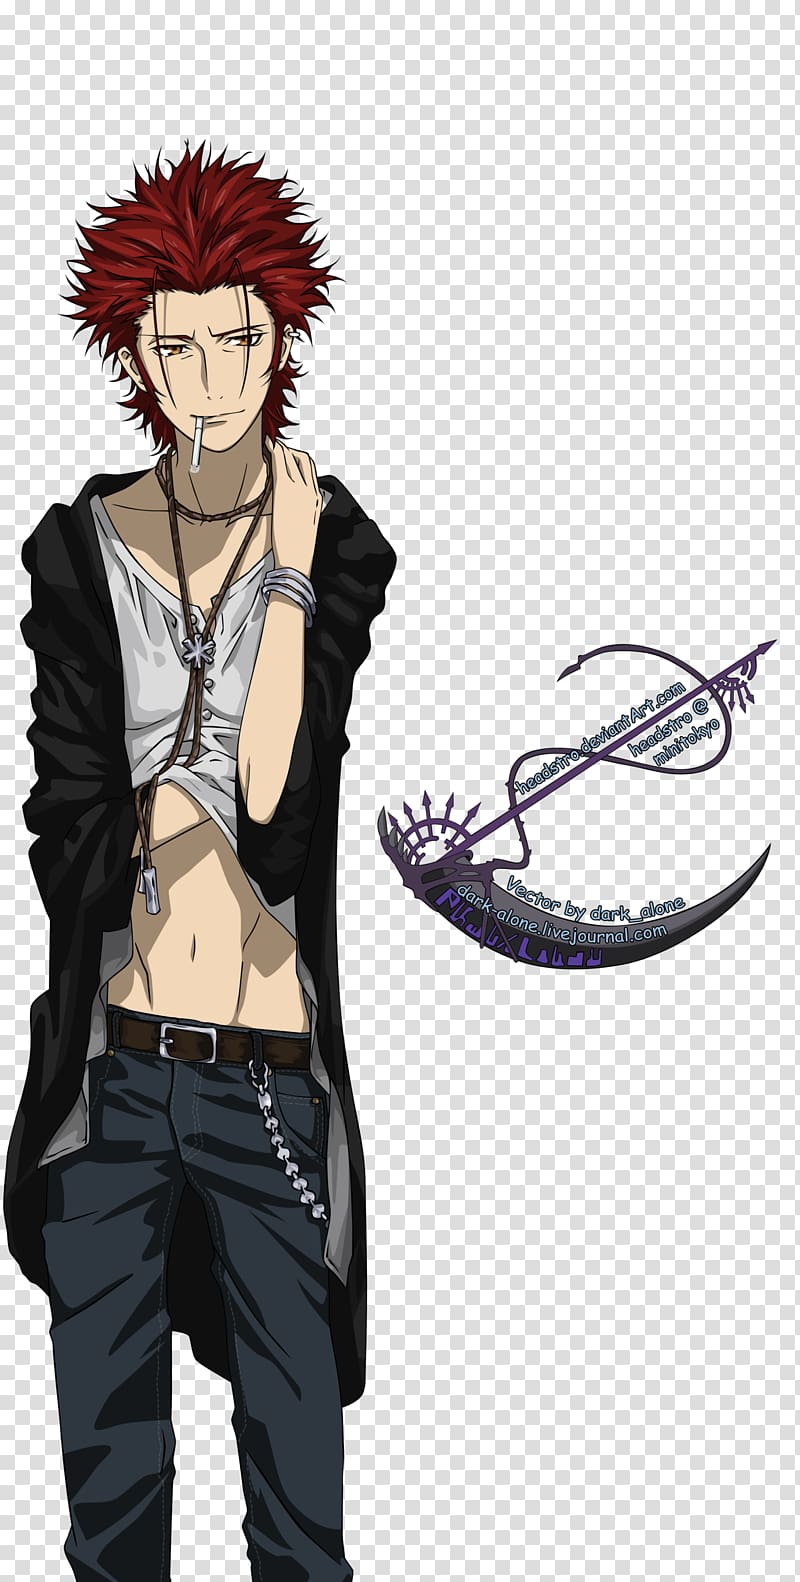 Mikoto Suoh Reisi Munakata Rendering, one colour transparent background PNG clipart